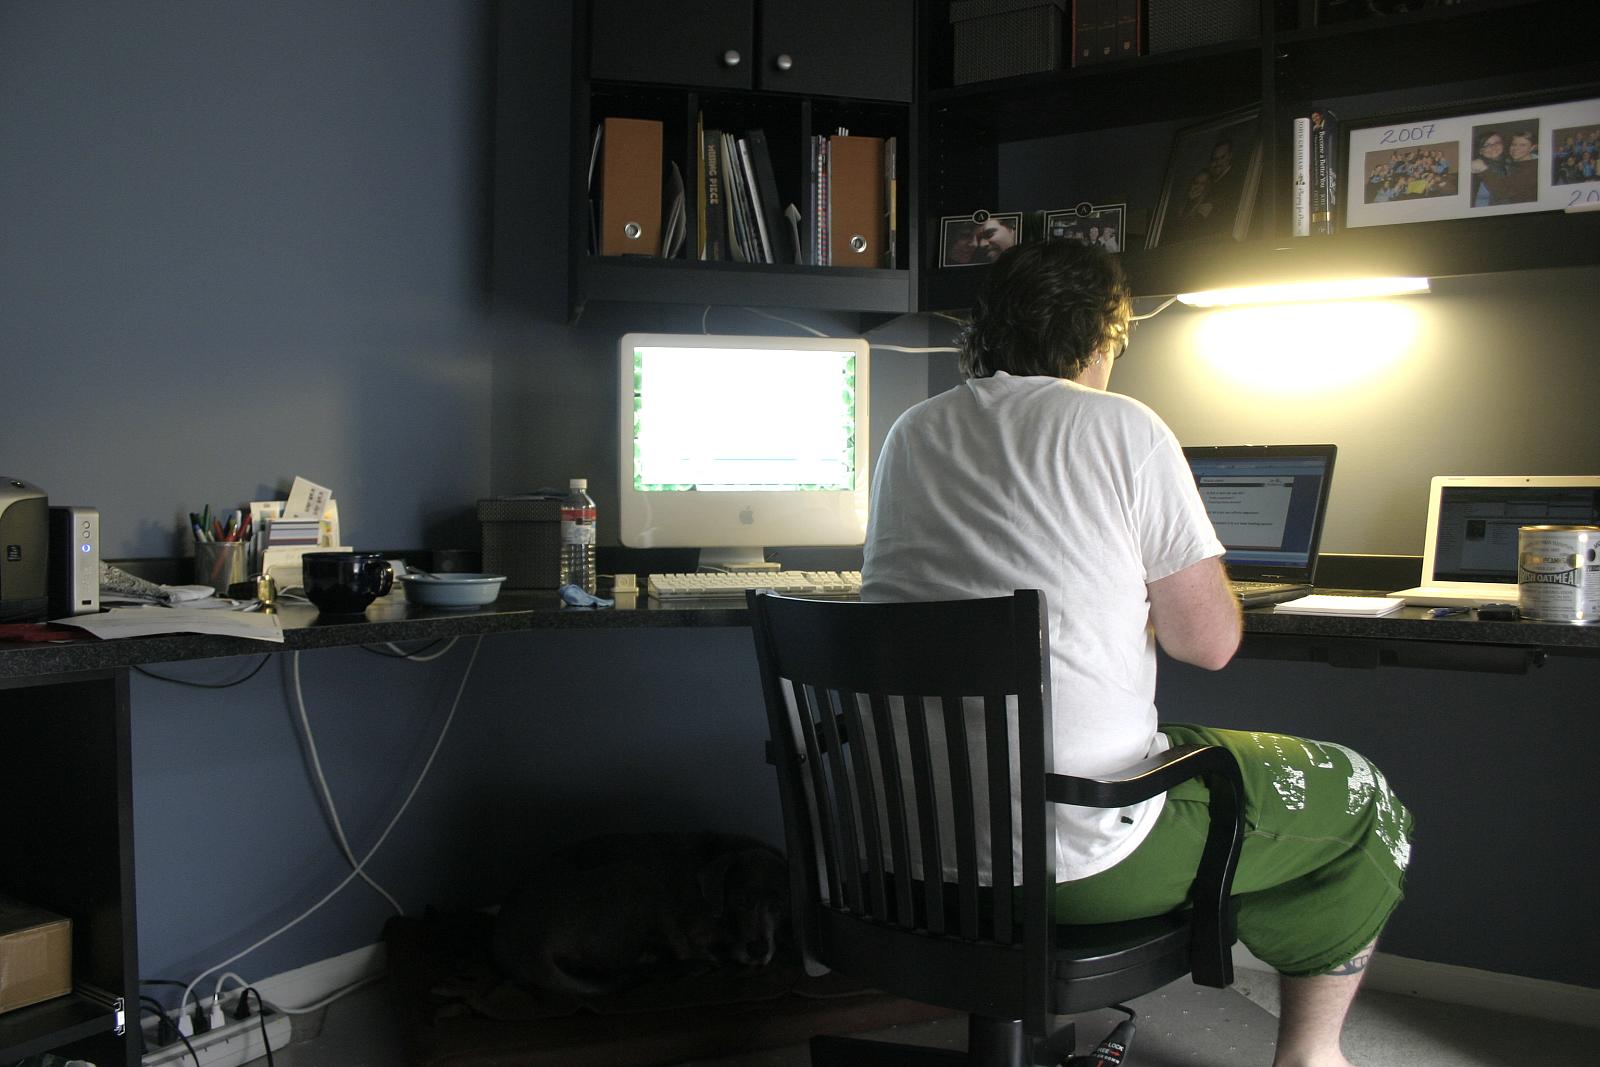 A man using a laptop at home | Source: Flickr